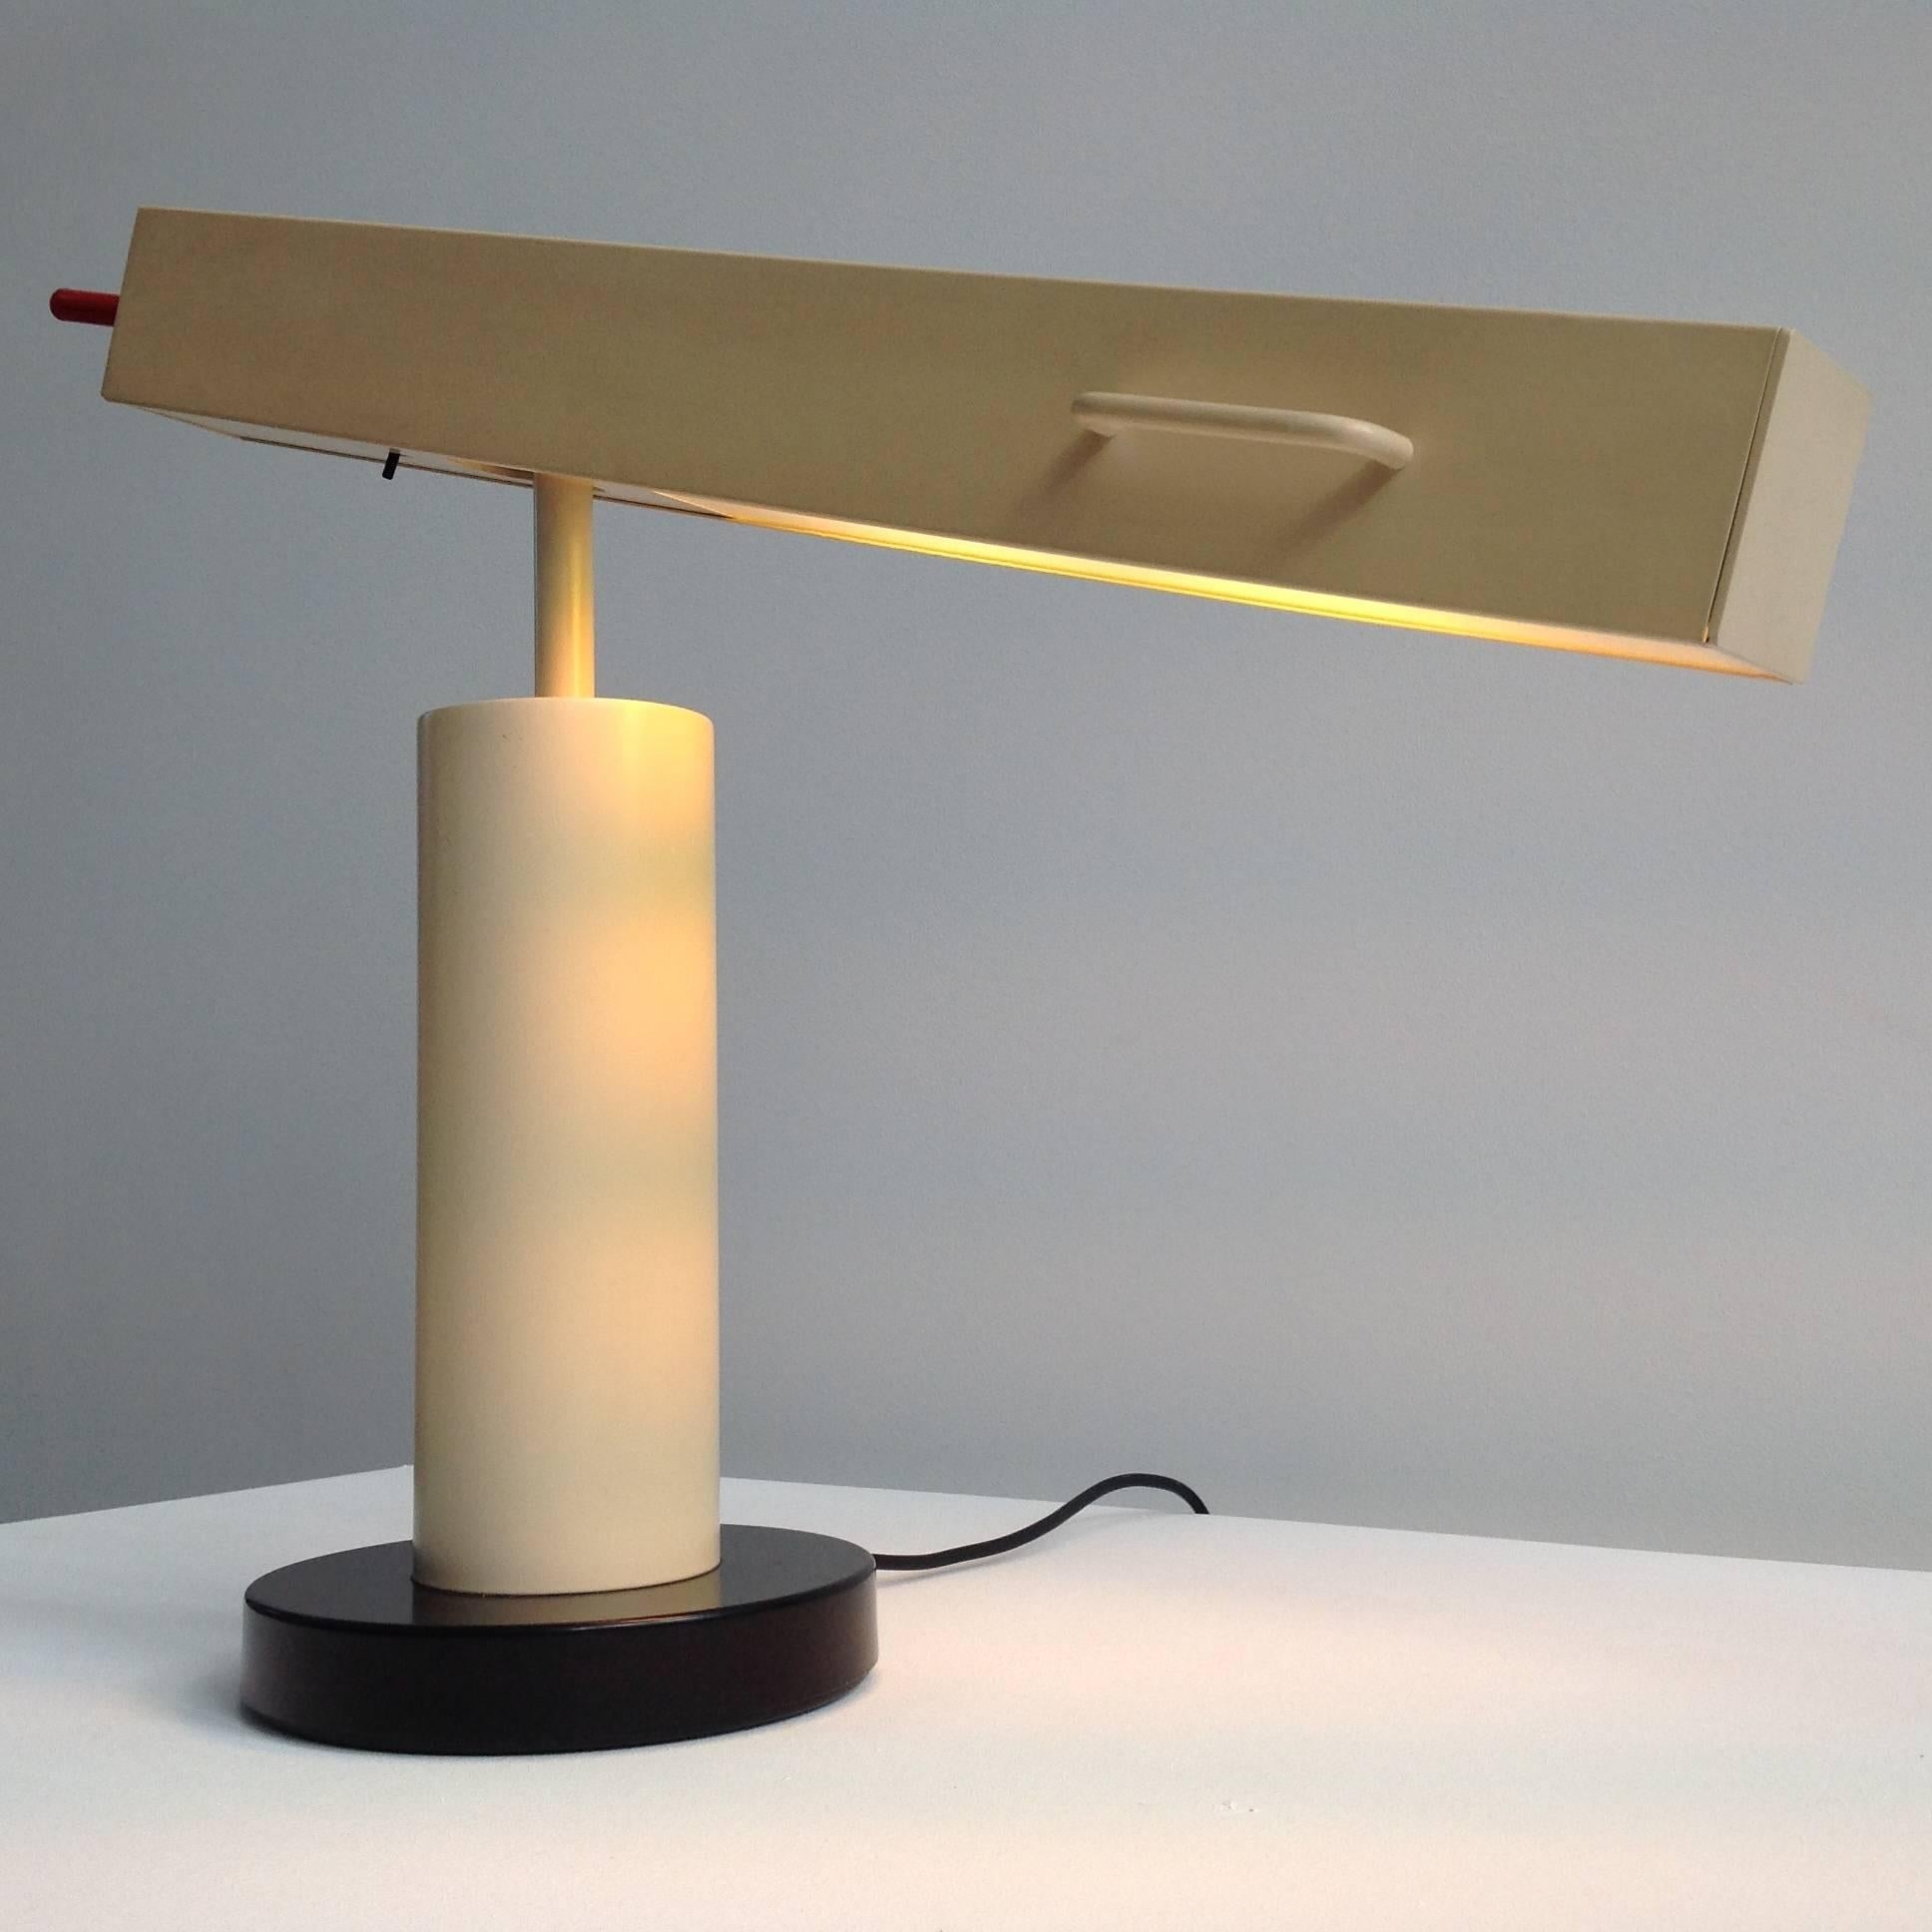 Late 20th Century Extremely Rare Desk Lamp Design by Ettore Sottsass, Made in Small Quantity For Sale